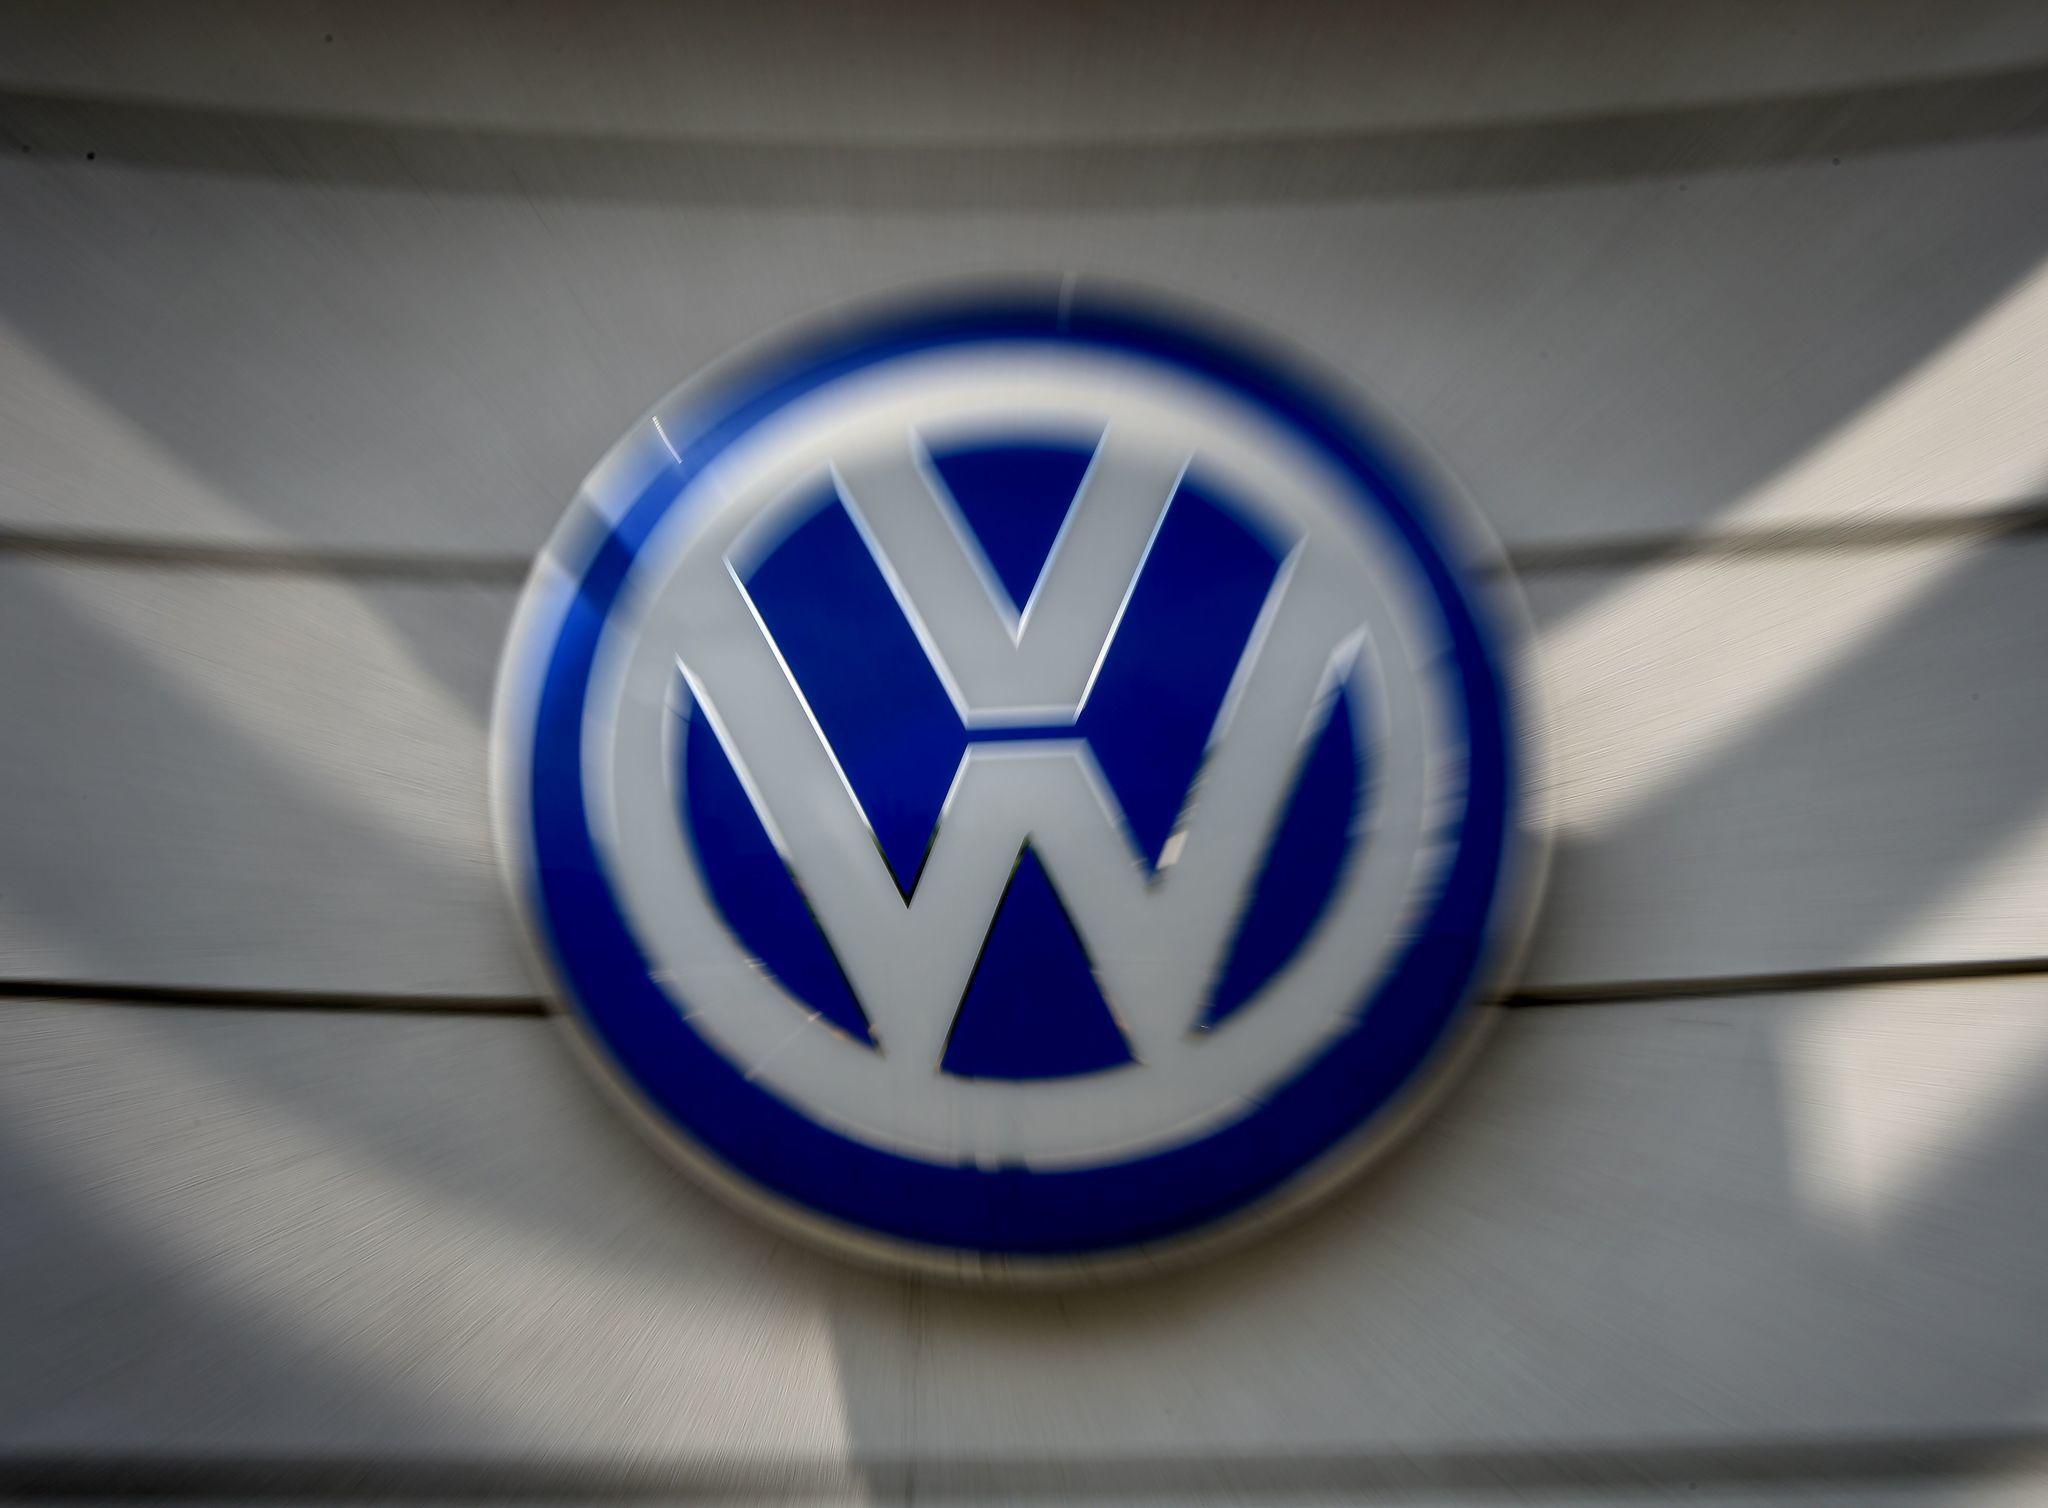 Lisa Rd Car Company Logo - Illinois forcing Volkswagen to clean up its act - Chicago Tribune